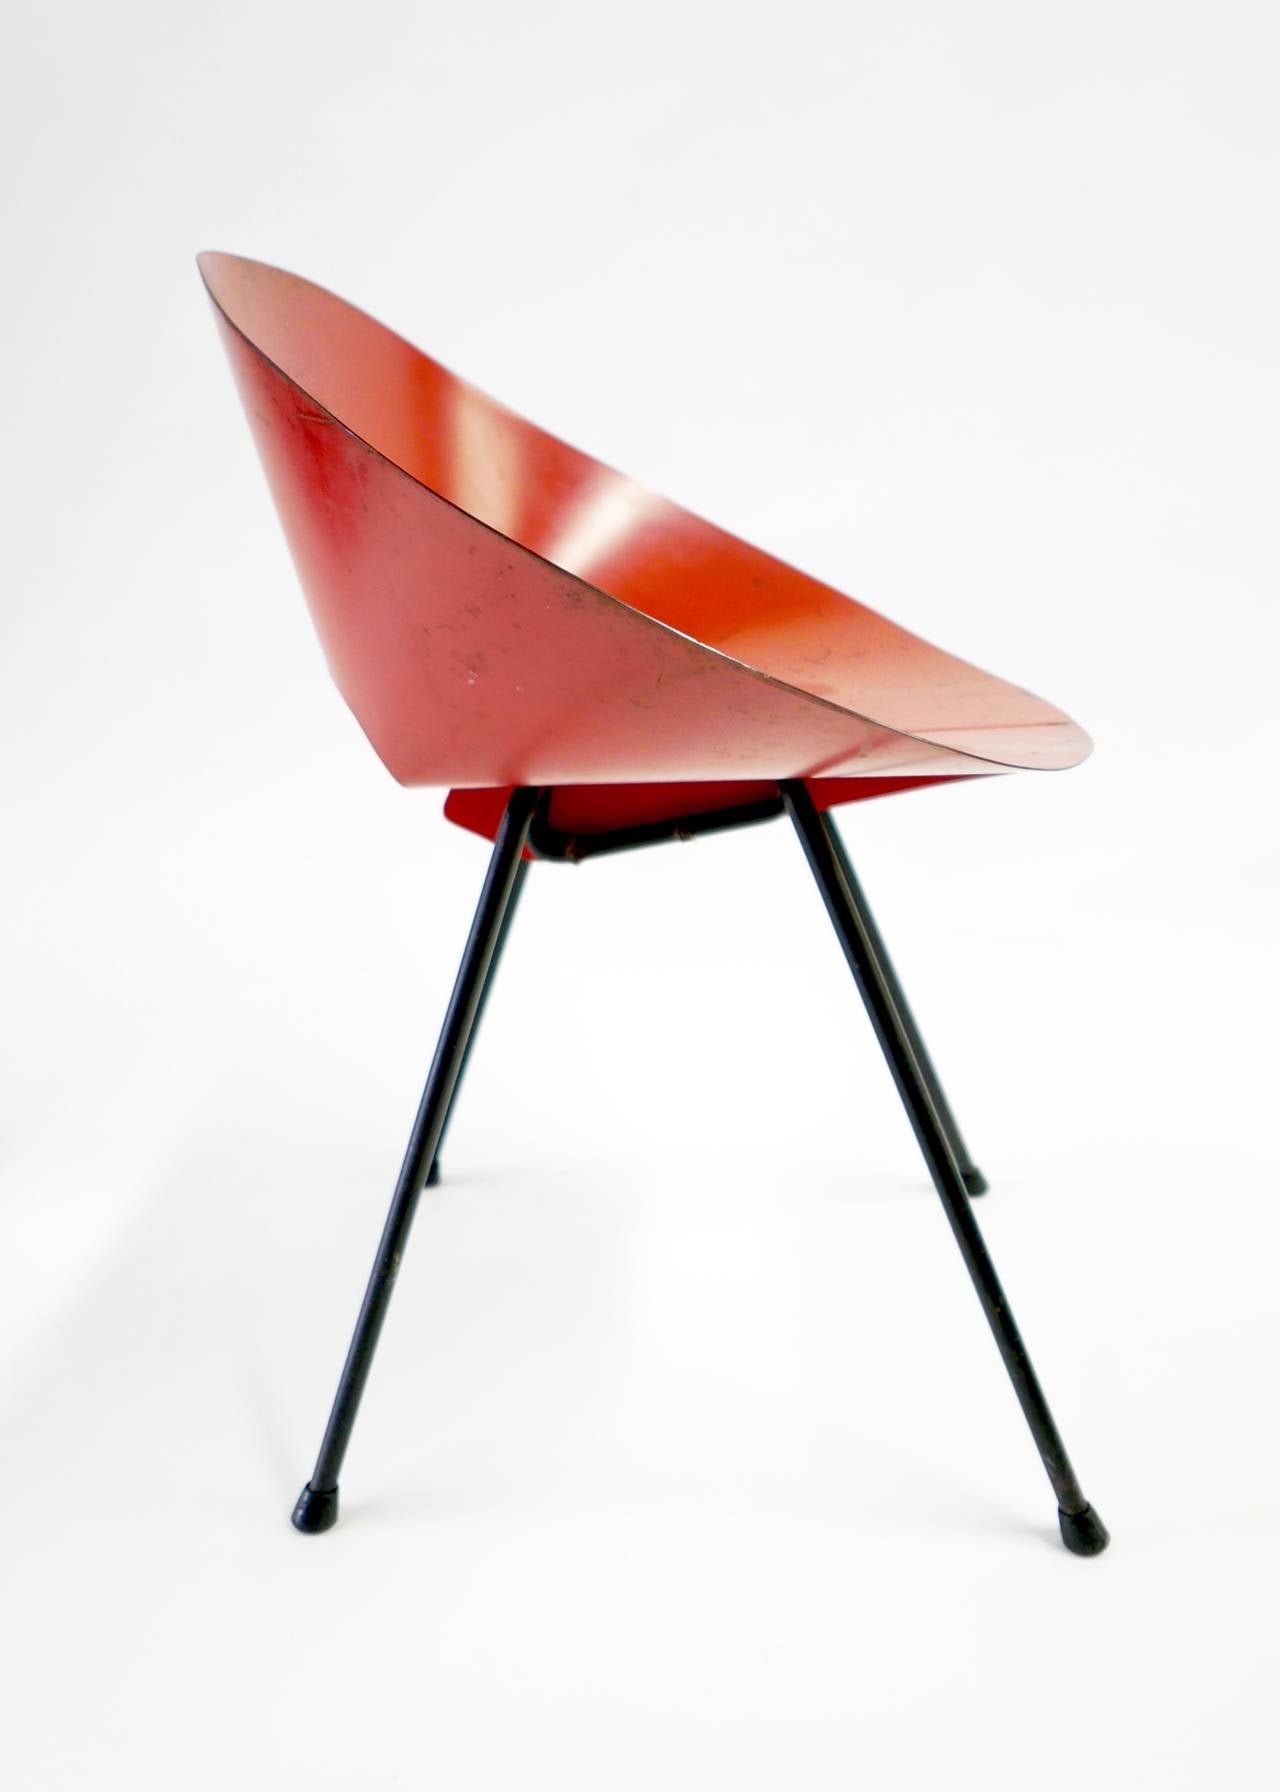 This design won first place in the museum of Modern Arts Low Cost Furniture Competition in 1948. A simple thin piece of steel creates the backrest and seat. Offered in original condition with a beautiful patina.